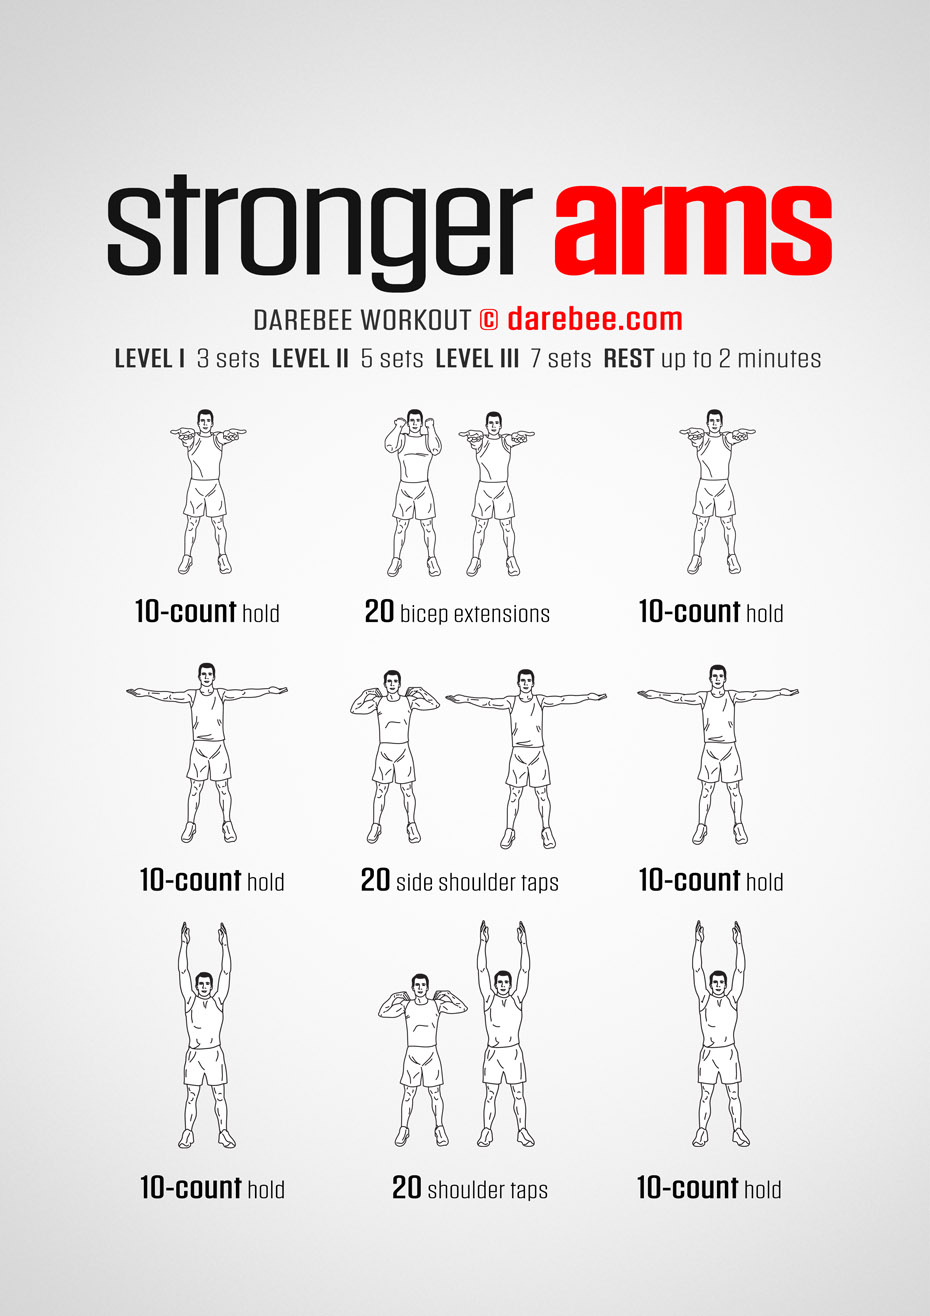 The Ultimate Arms Workout (Beginner Guide)